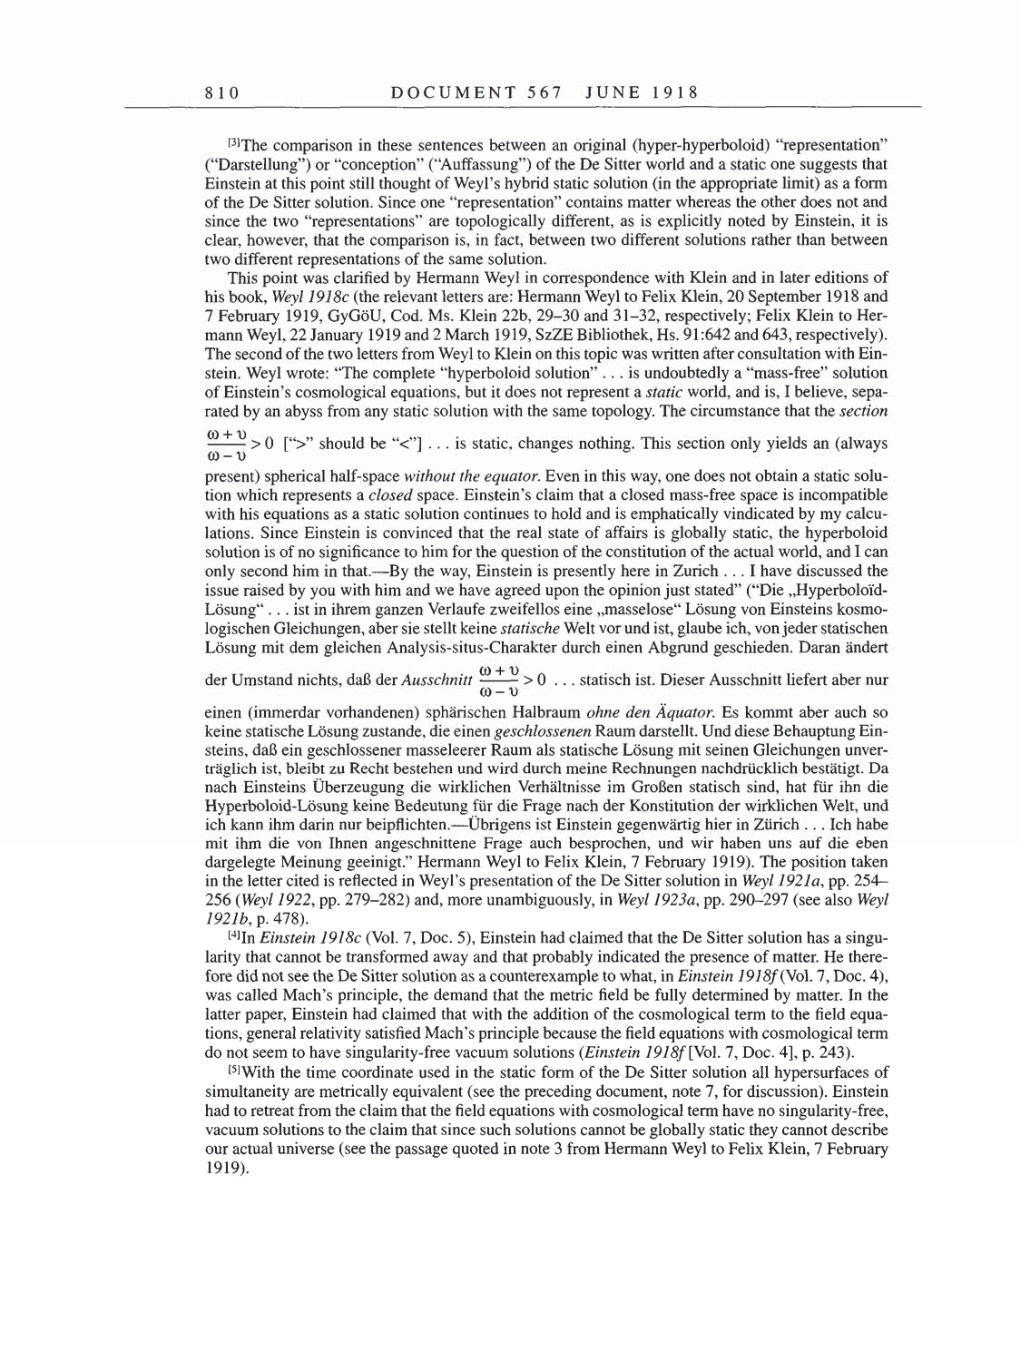 Volume 8, Part B: The Berlin Years: Correspondence 1918 page 810